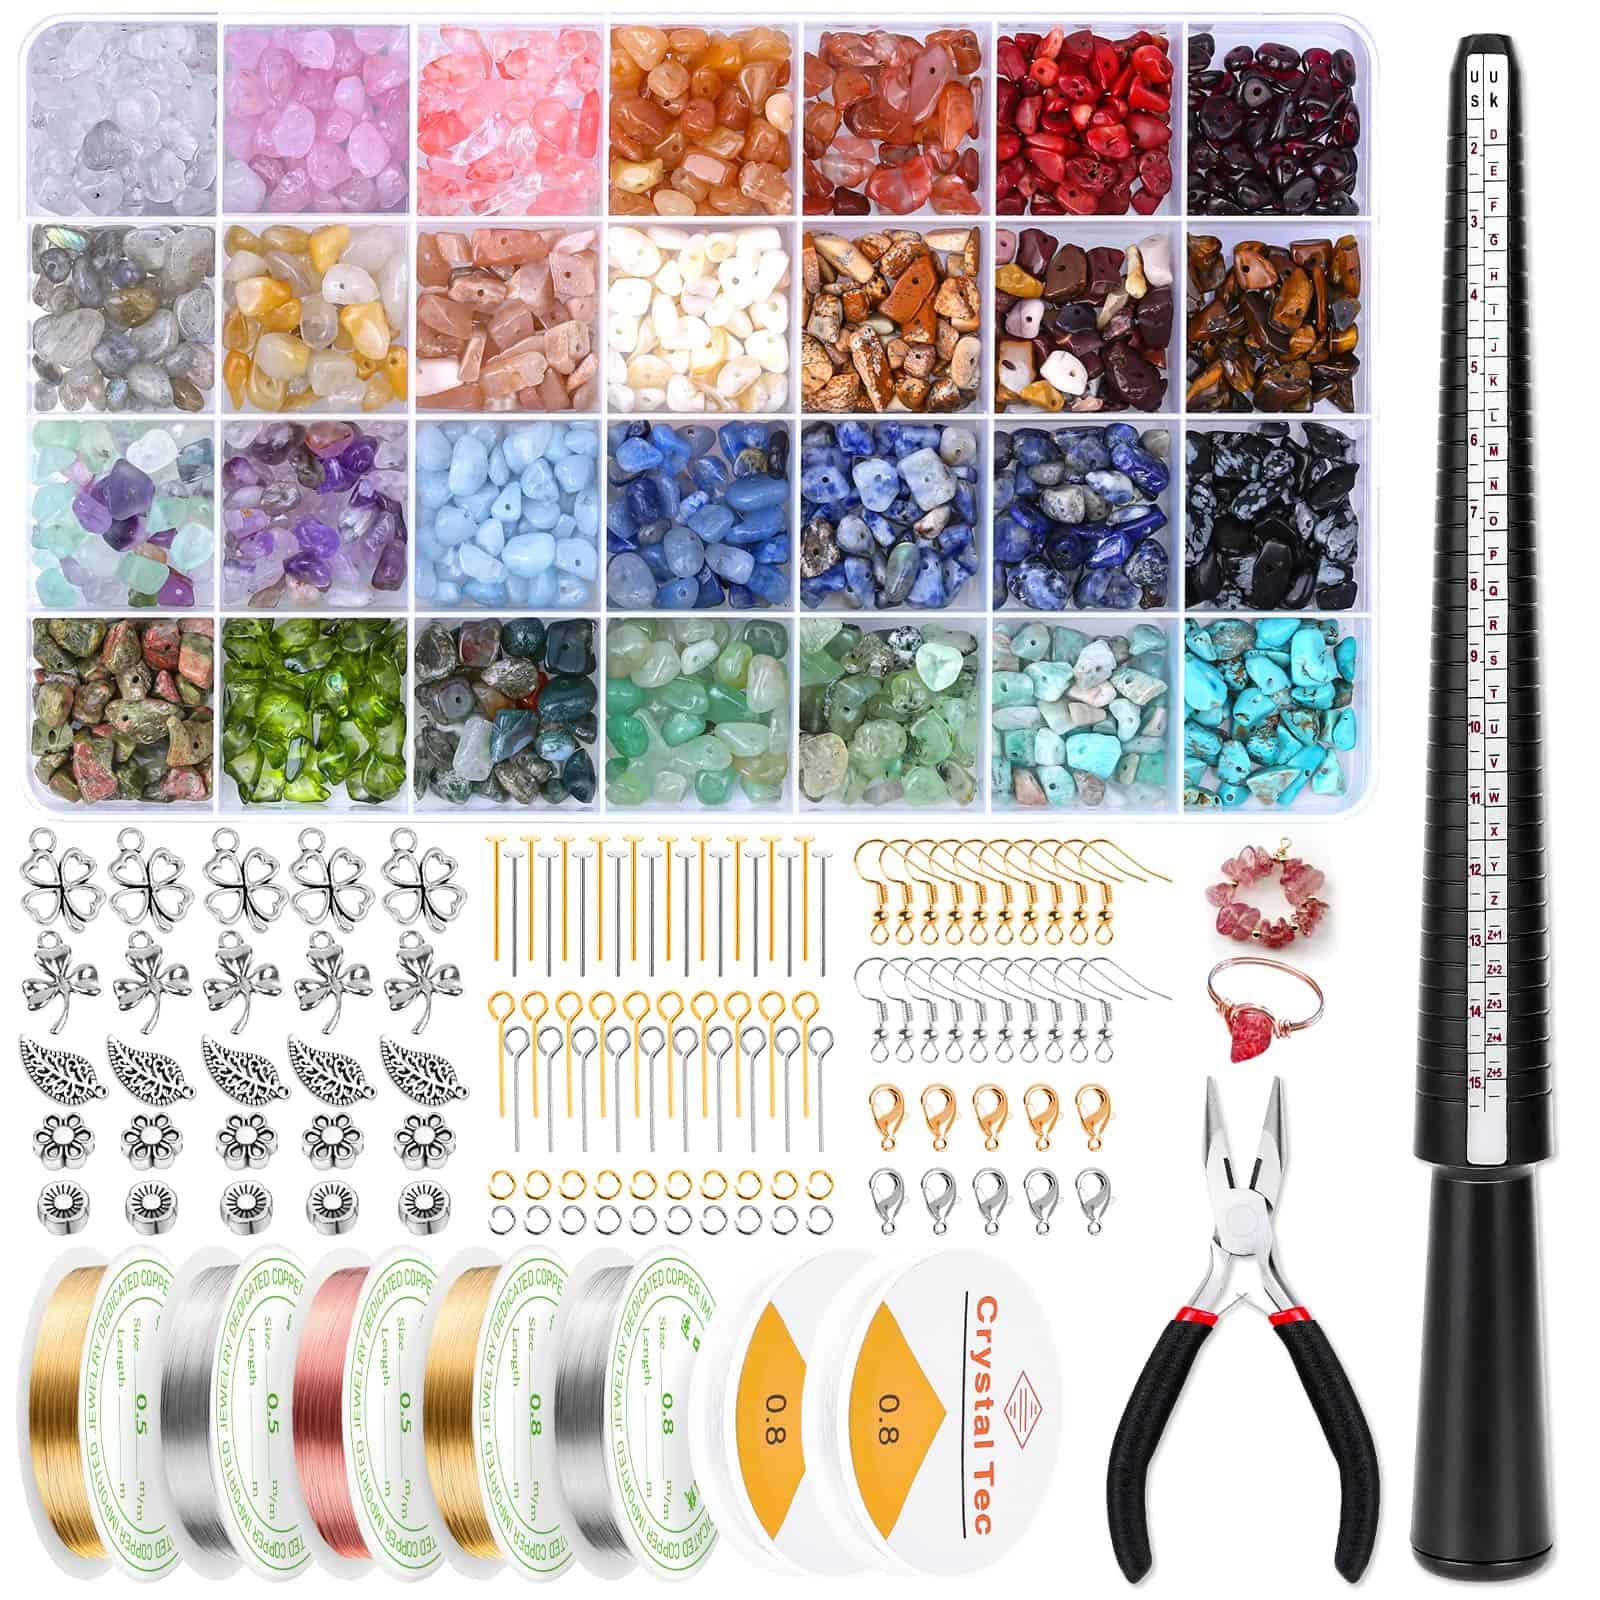 Ring Making Kit with 28 Colors Crystal Beads,1660 Pcs Crystal Jewelry Making  Kit with Gemstone Chip Beads, Jewelry Wire